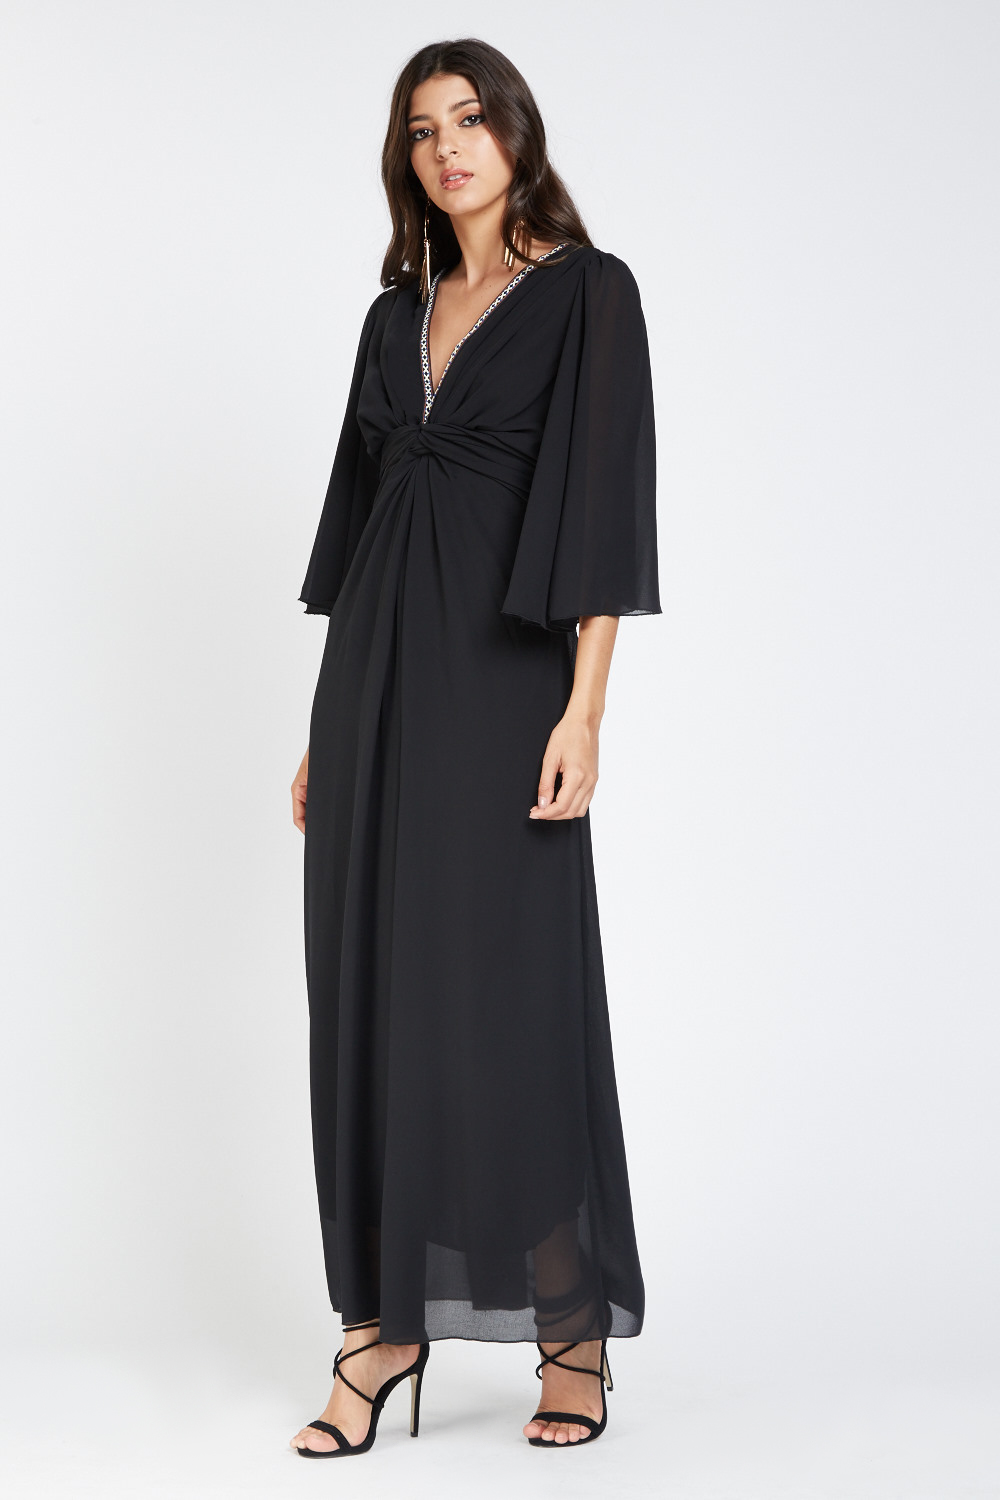 Knotted Sheer Draped Maxi Dress - Just $7